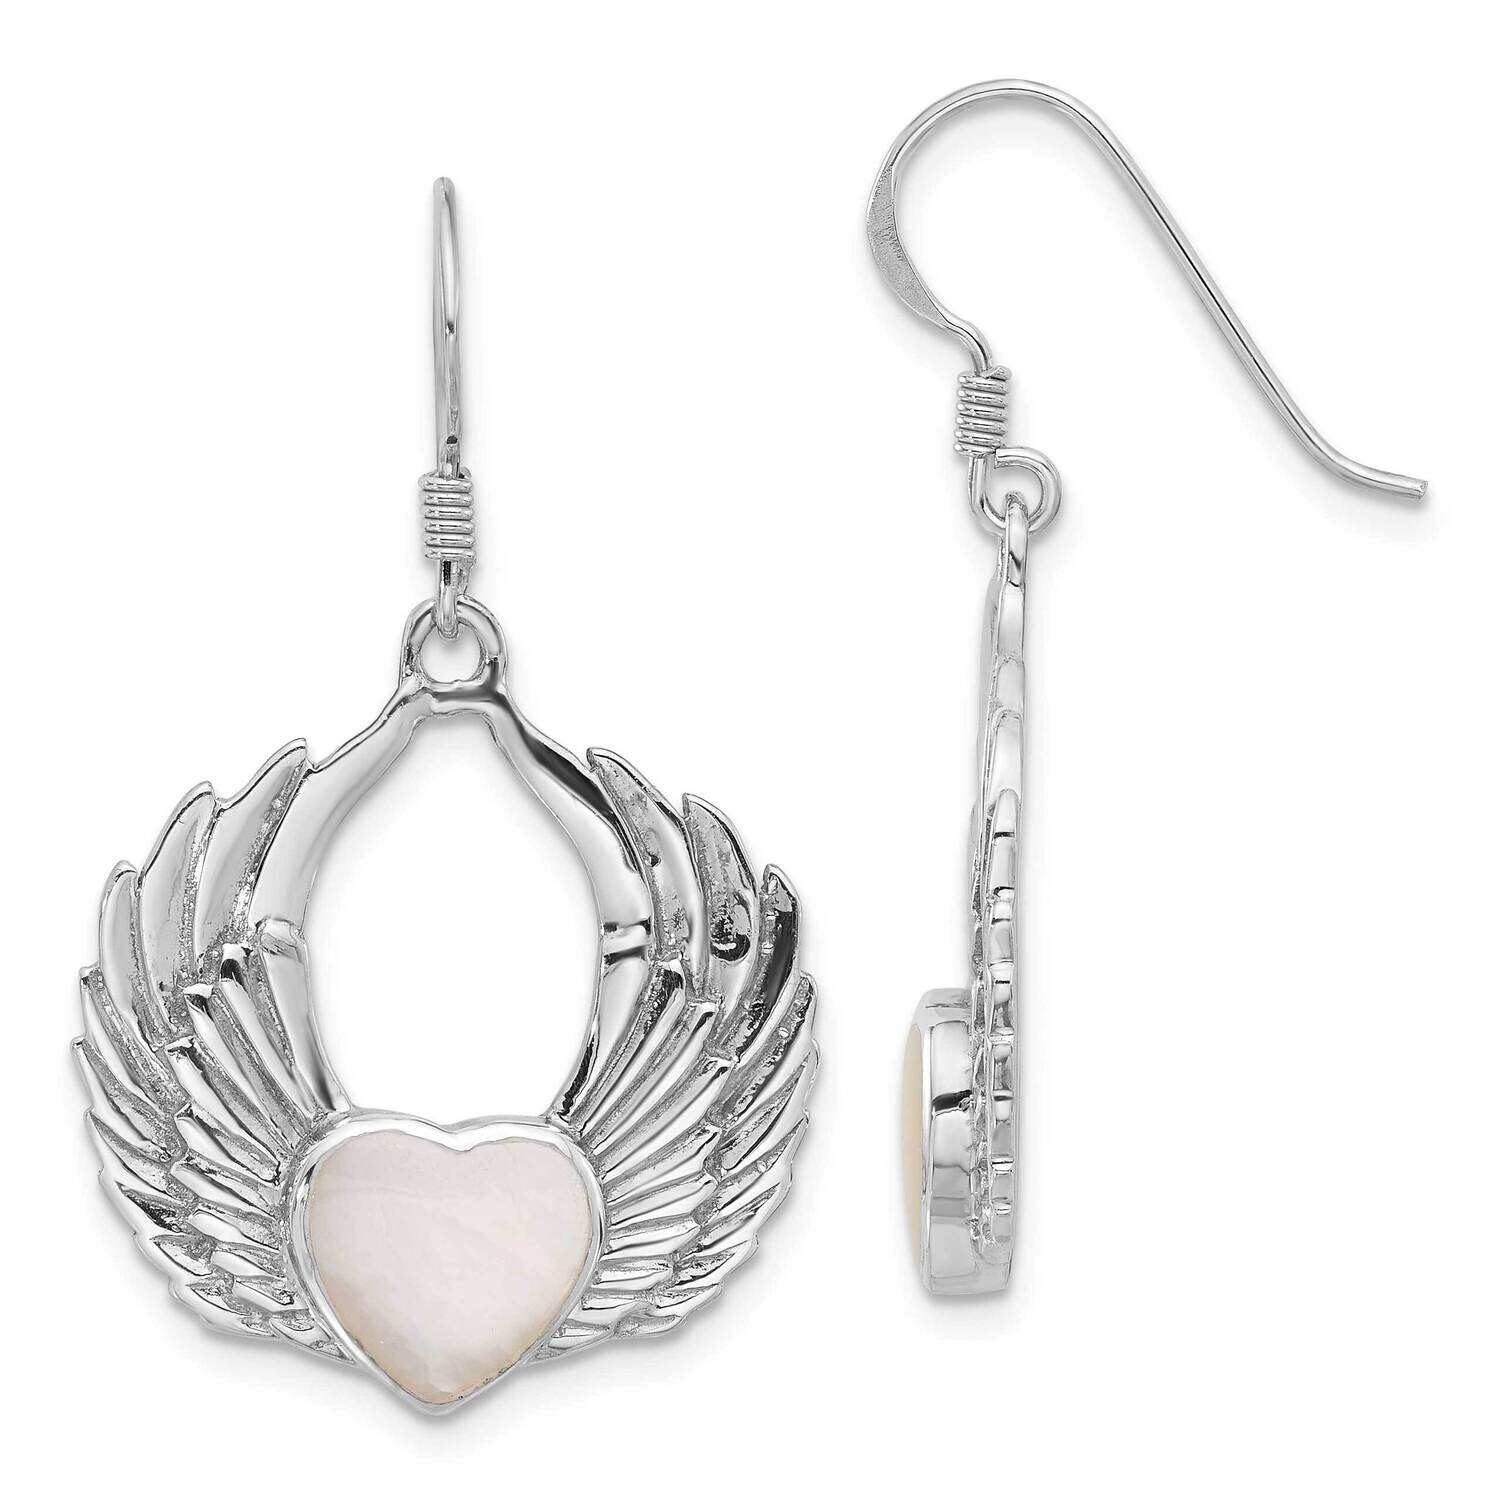 Rhod-Plated Polished Mother Of Pearl Winged Heart Earrings Sterling Silver QE17525